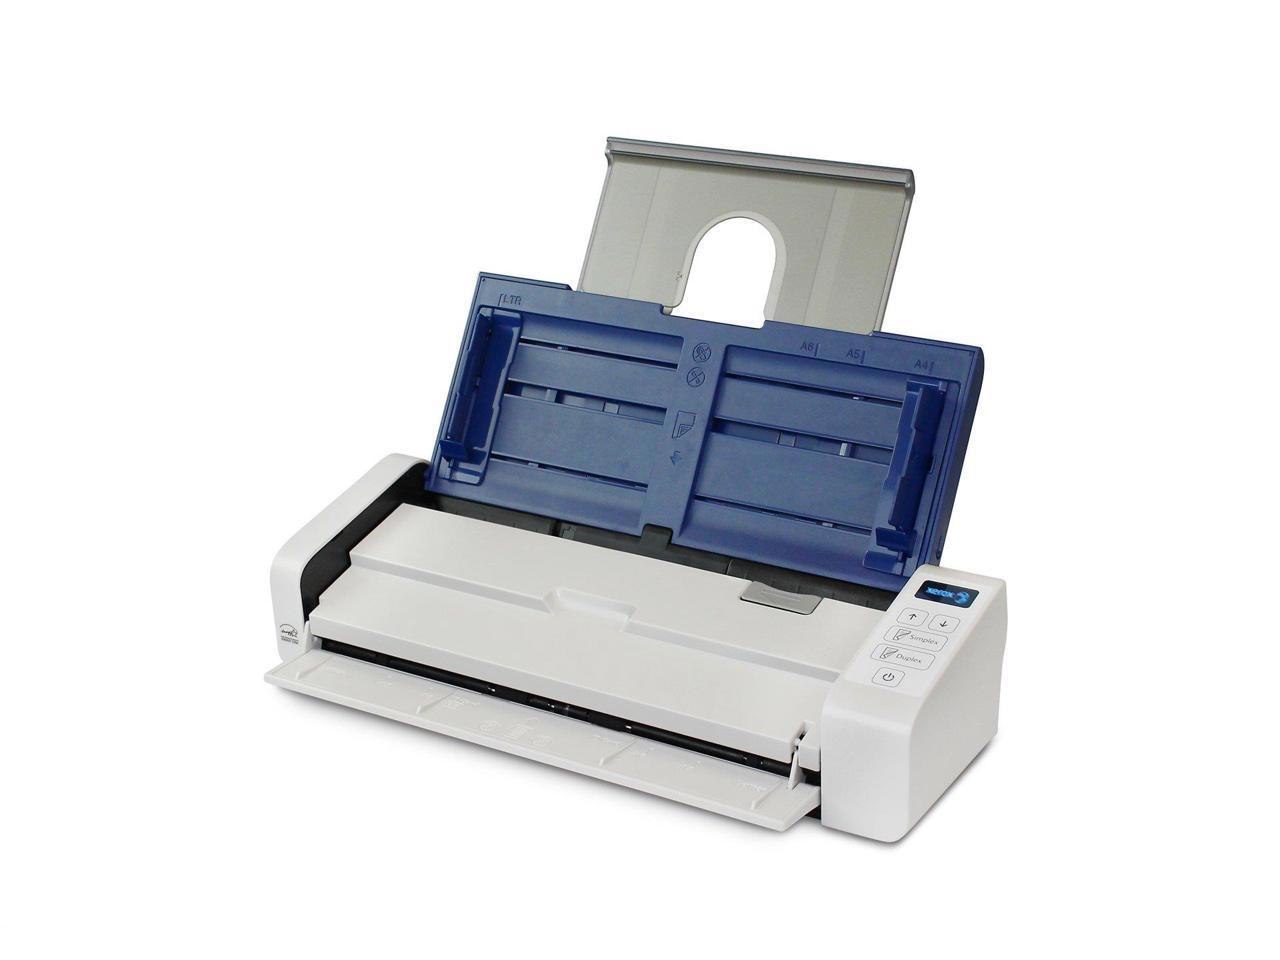 Xerox - XDS-P - Portable Duplex Scanner 20PPM/40PPM Adf 20Sheets